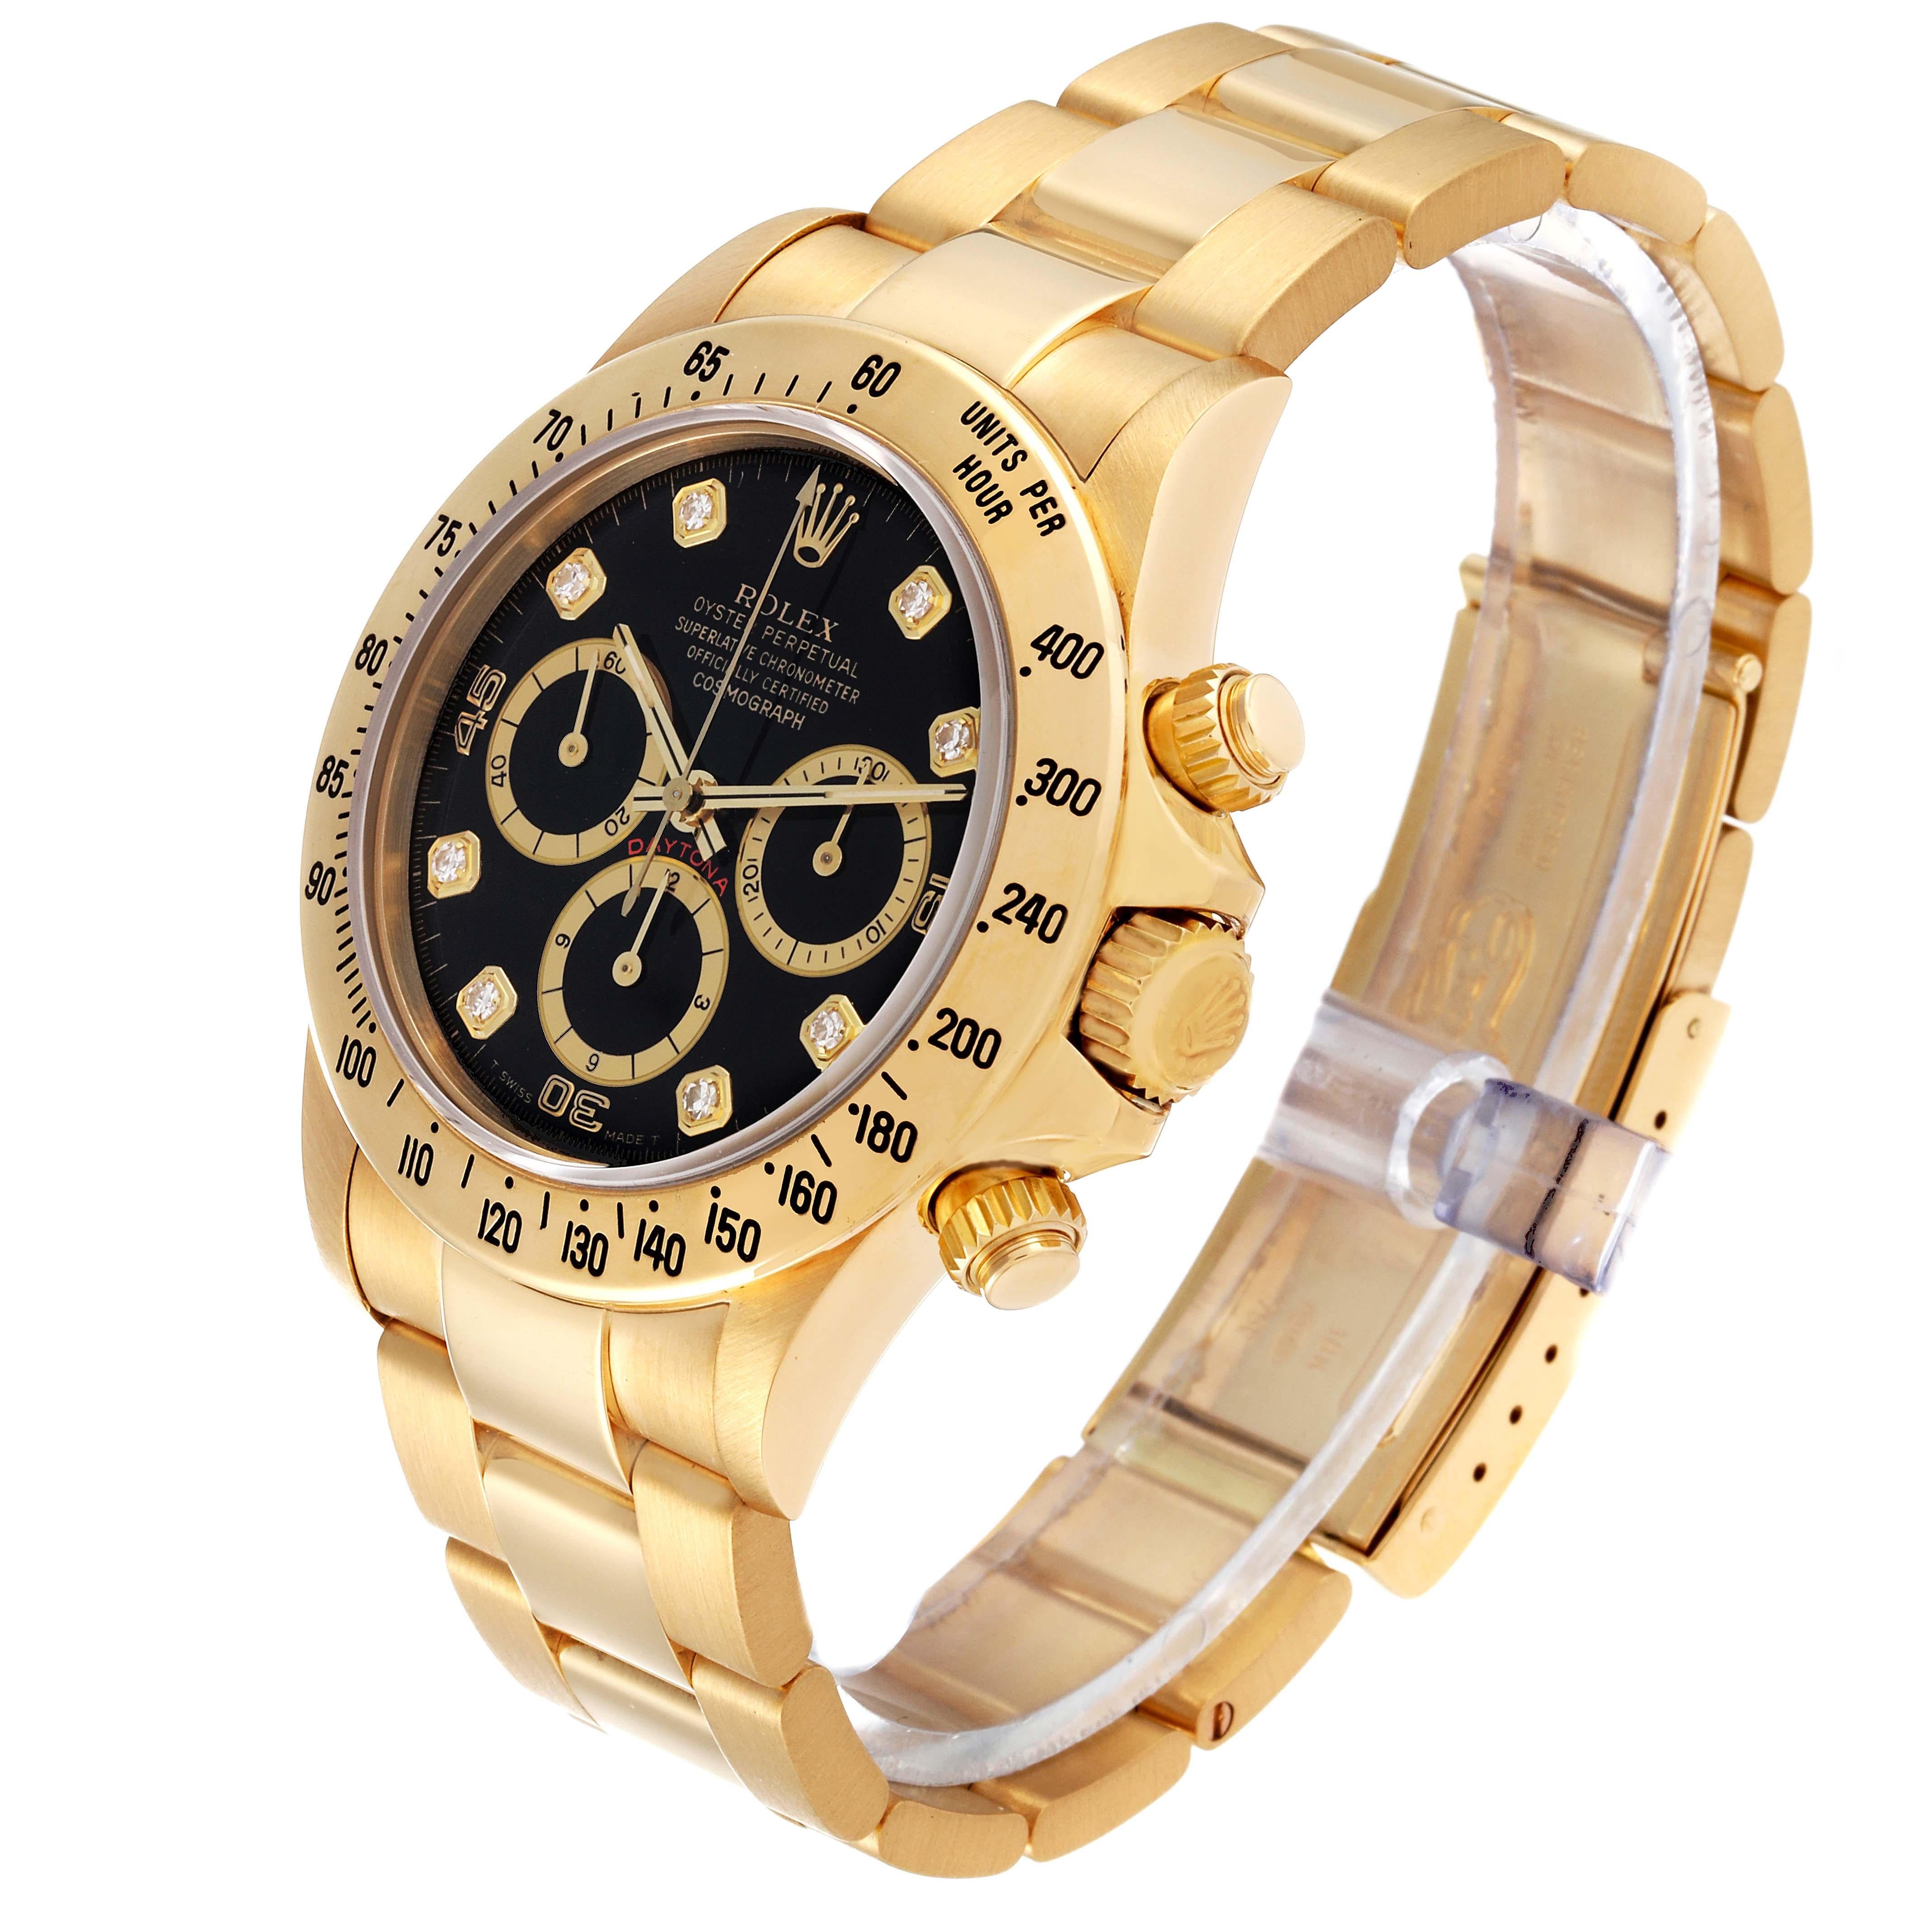 Rolex Daytona Yellow Gold Inverted 6 Diamond Dial Mens Watch 16528 For Sale 5